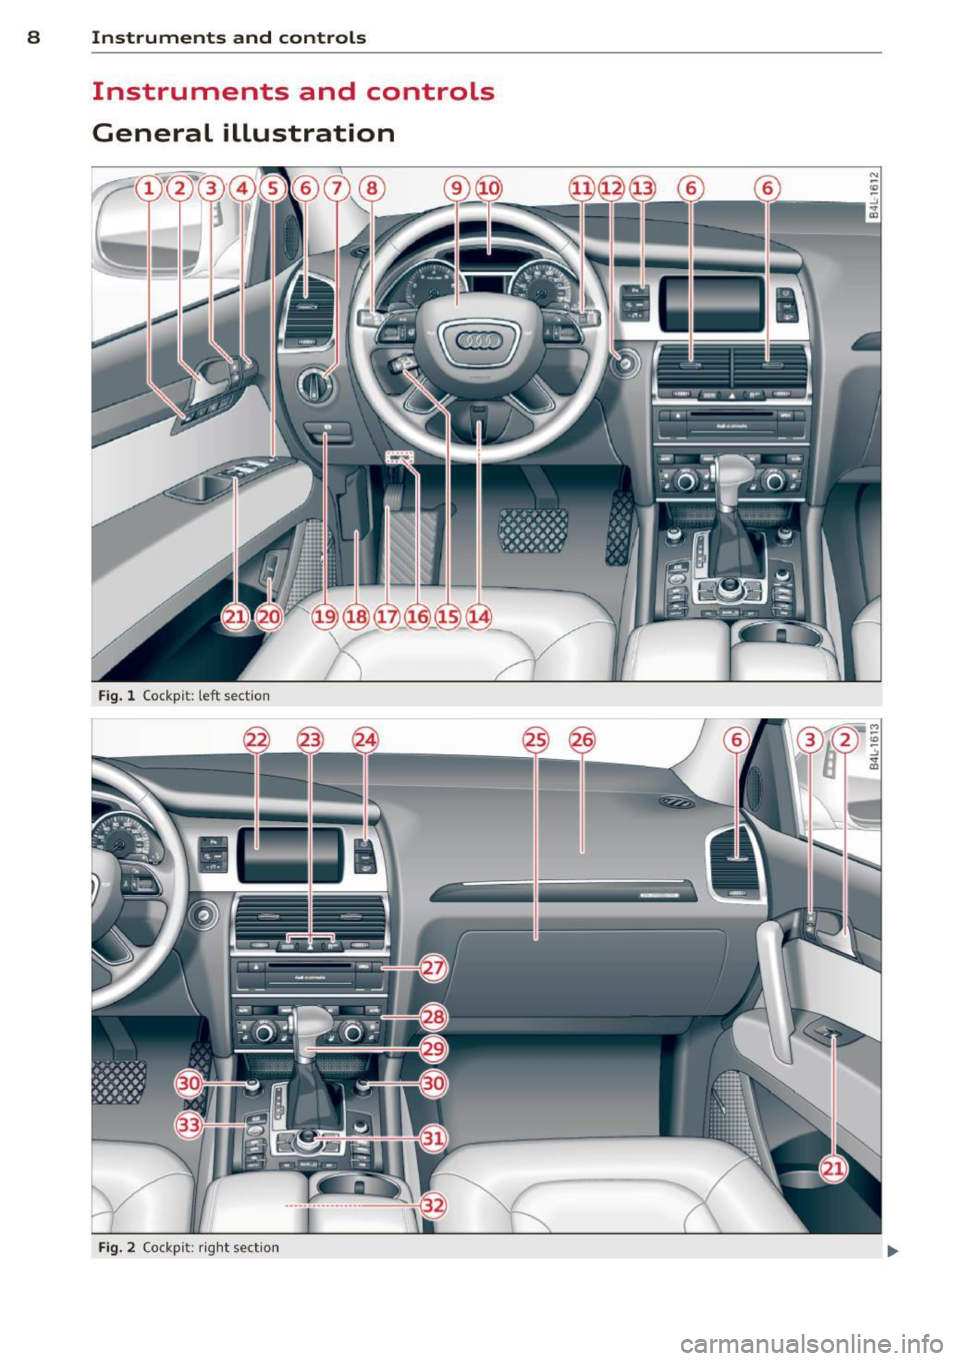 AUDI Q7 2013  Owner´s Manual 8  Instruments and controls 
Instruments  and  controls 
General  illustration 
Fig. l Cockp it:  left  sect io n 
-----
-----
----- ---
- - -- - -
~ --------
~ -,~ ---~ -·-c-•-
Fig. 2 Cock pi t: r